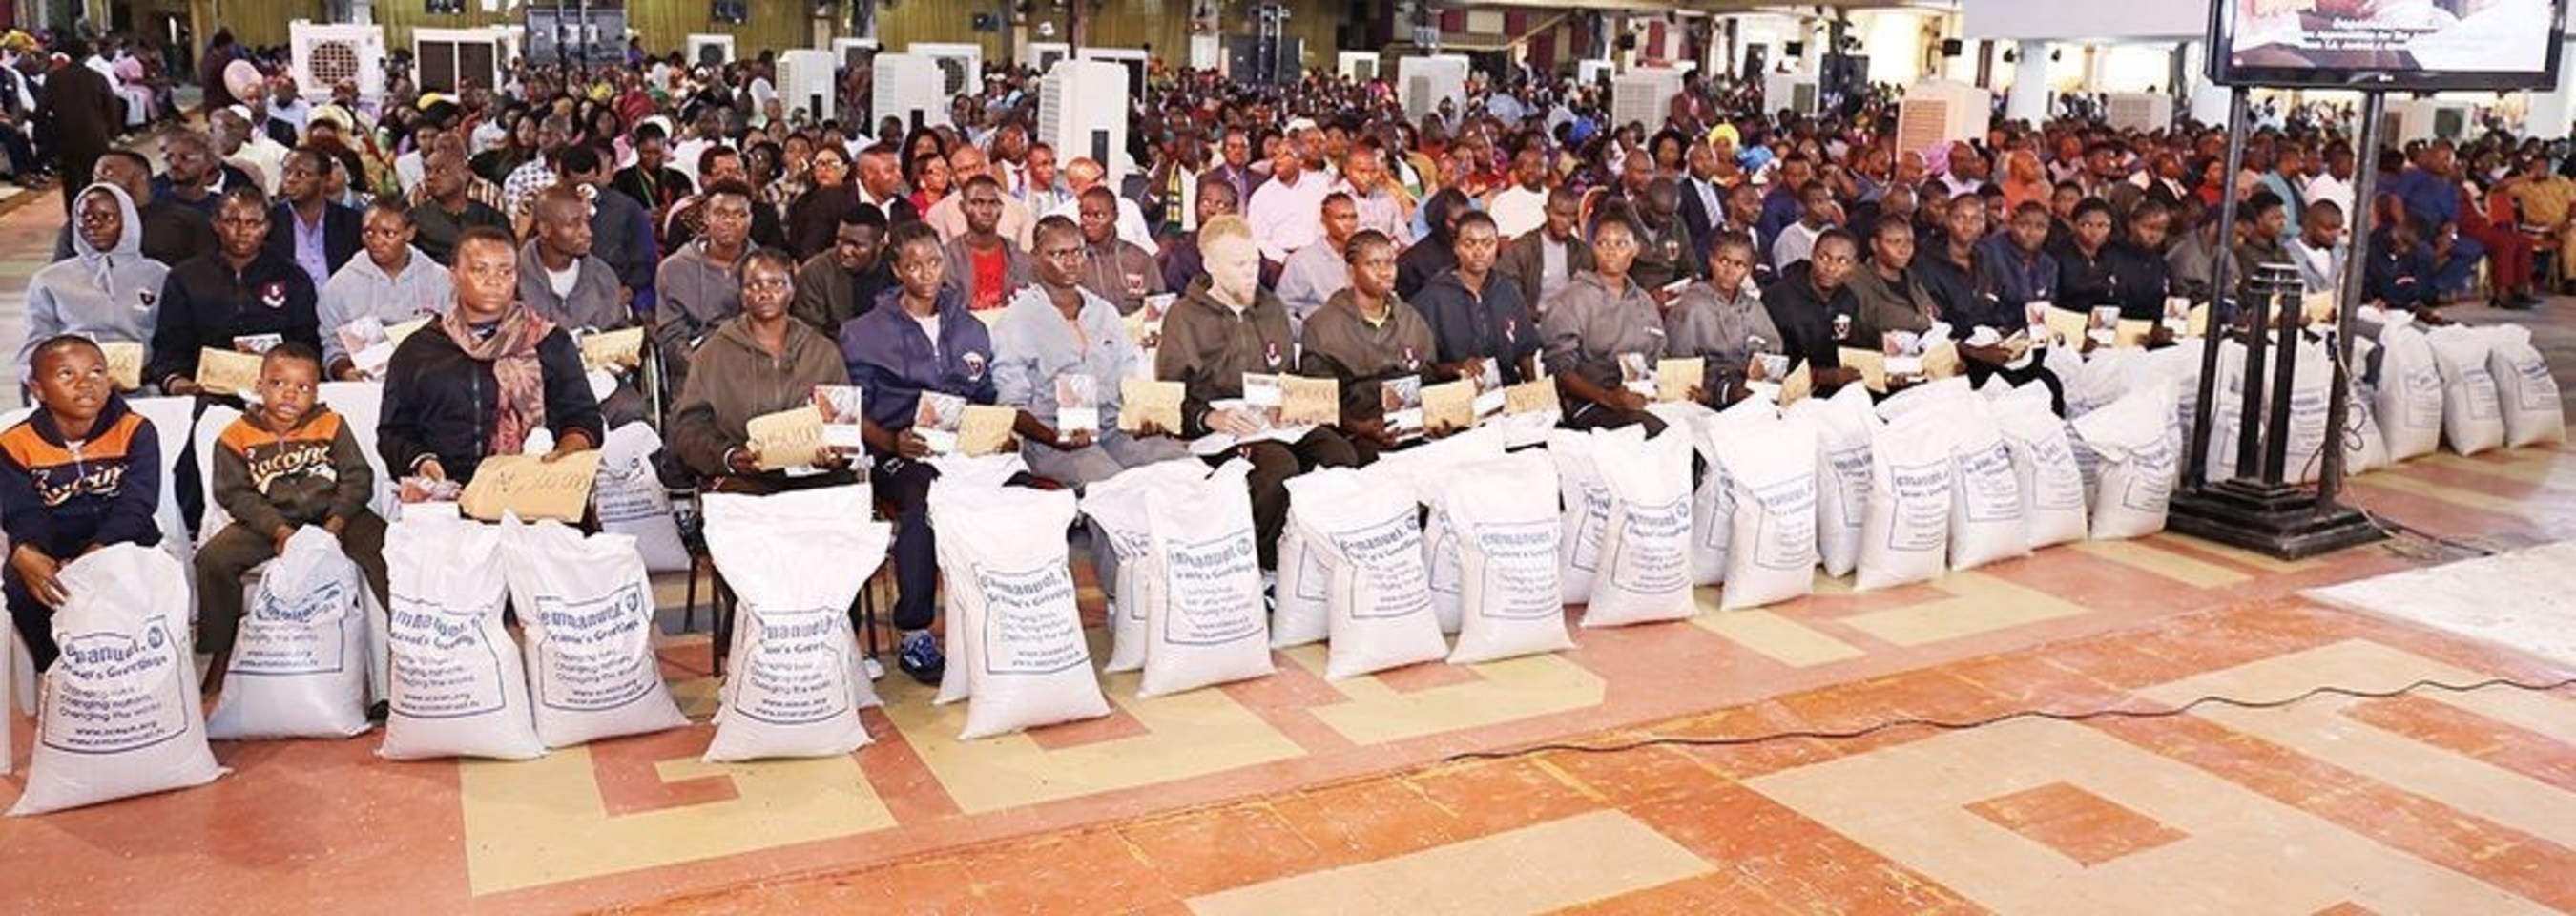 The large group of deportees gratefully receive individual cash gifts of N150,000 ($500USD) and two bags of rice after sharing their sordid experiences at The Synagogue, Church Of All Nations (SCOAN). (PRNewsFoto/Emmanuel TV)